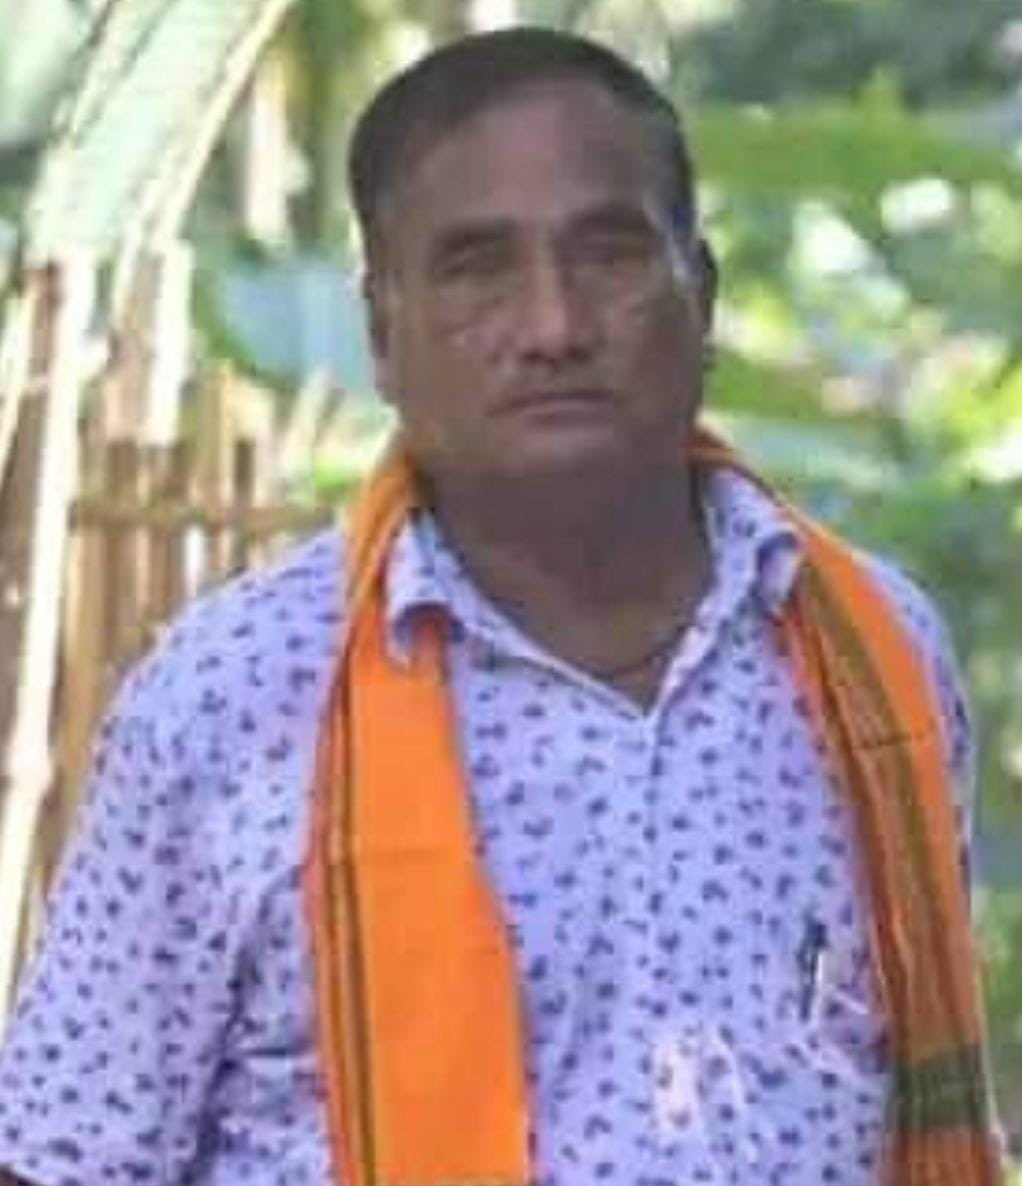 Shri Momin Bordoloi, from Morigaon , was an excellent footballer from Assam who captained our State at the Santosh Trophy. A veteran of the Assam Police, he was an inspiration to several budding sportspersons from my constituency. My condolences to his family and well-wishers 🙏